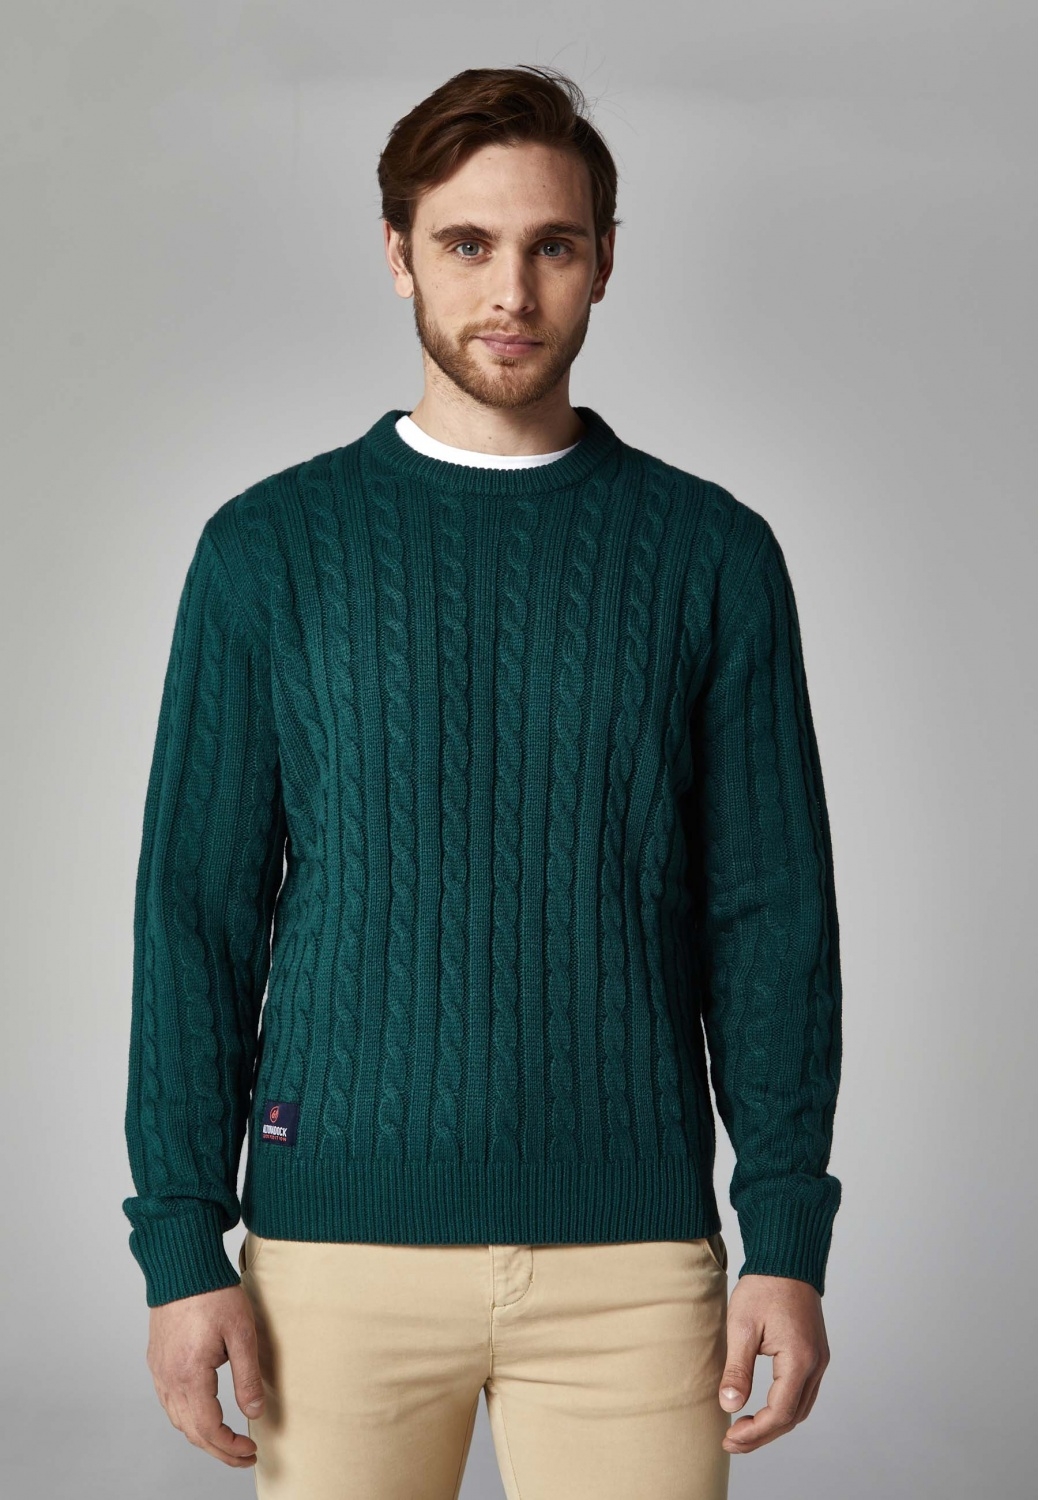 Men's chunky knit pullover...